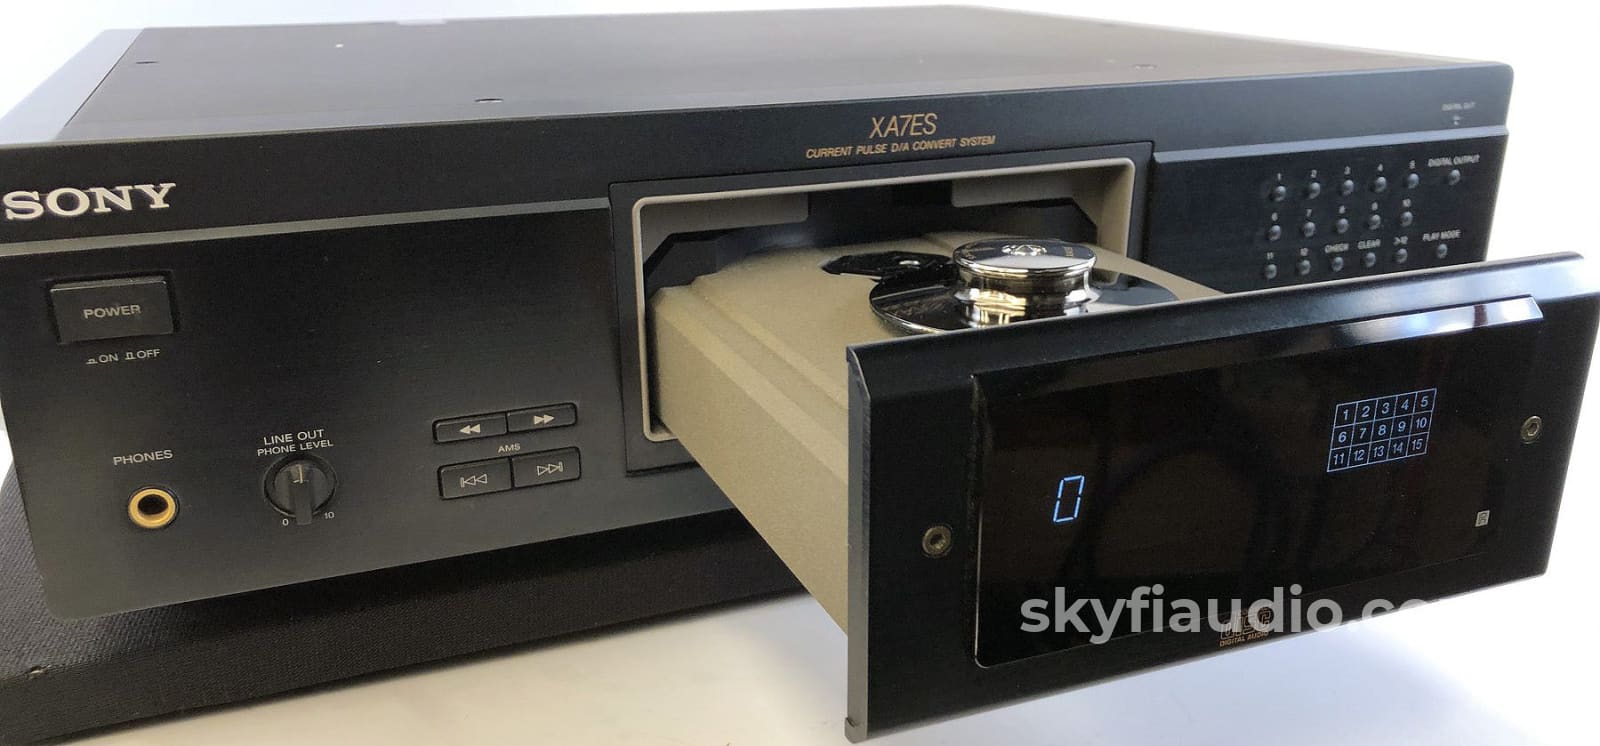 Sony CDP-XA7ES CD Player - One of the Best From The 1990's 